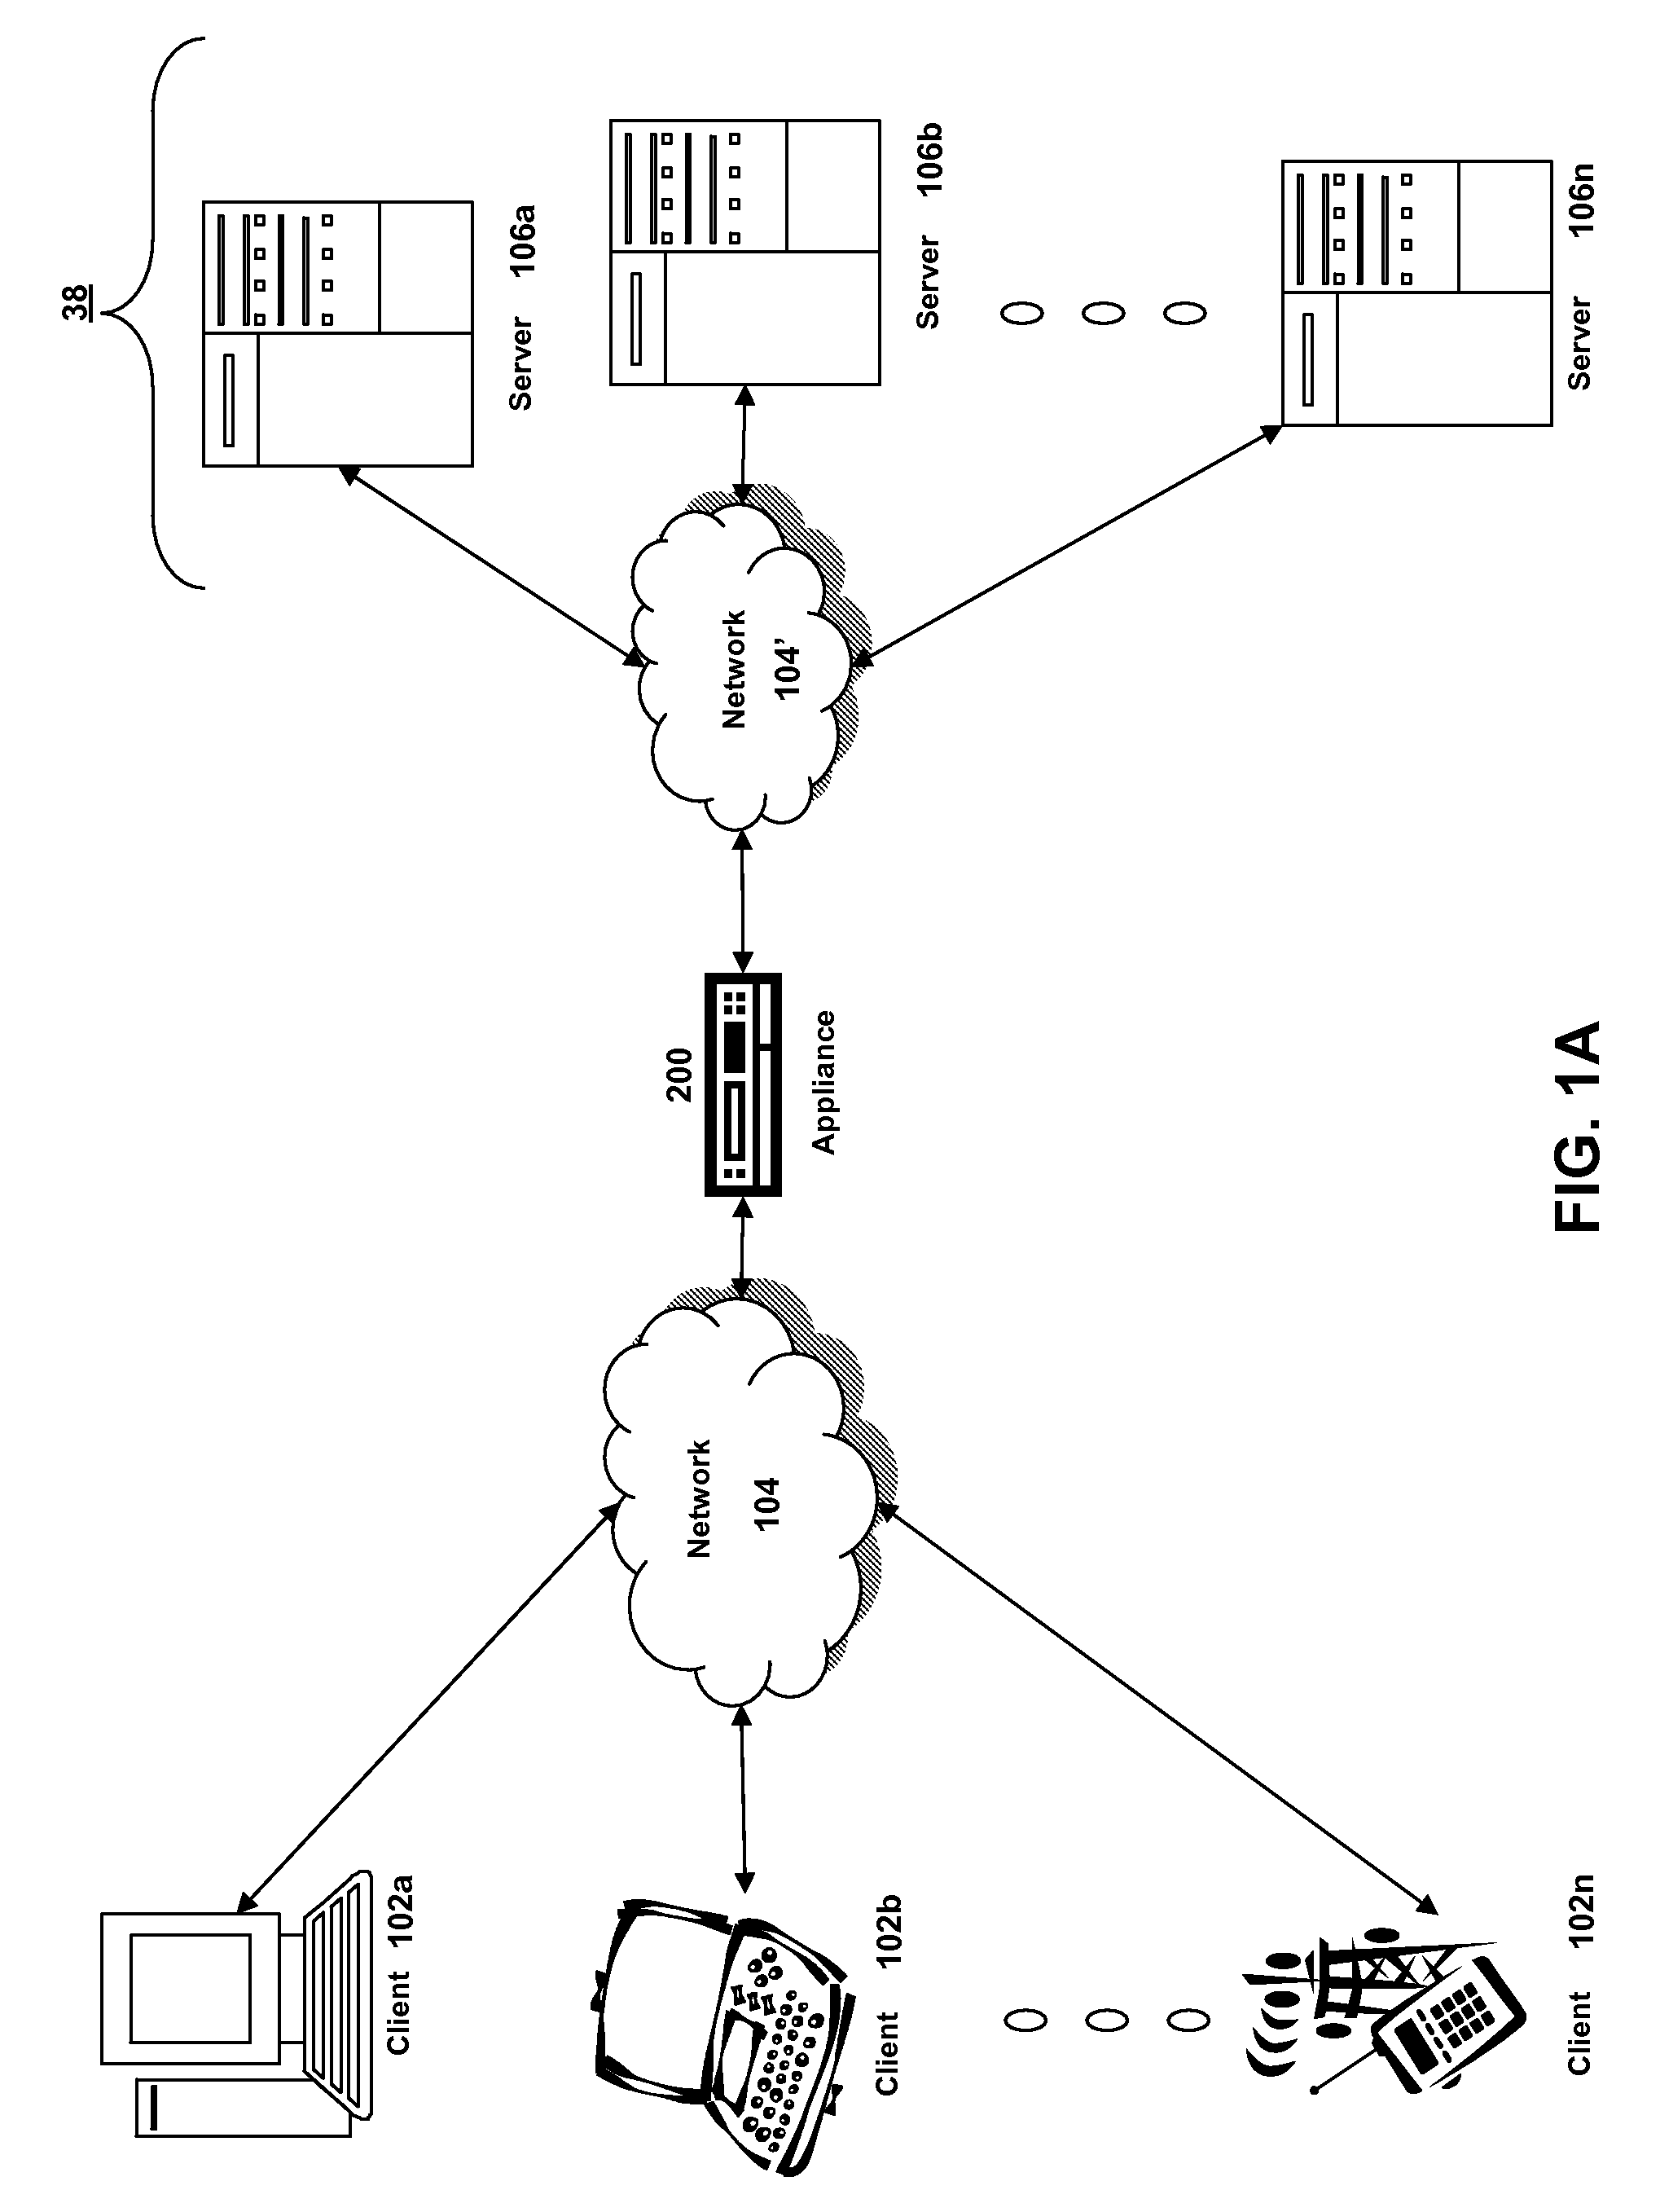 Systems and methods for providing structured policy expressions to represent unstructured data in a network appliance